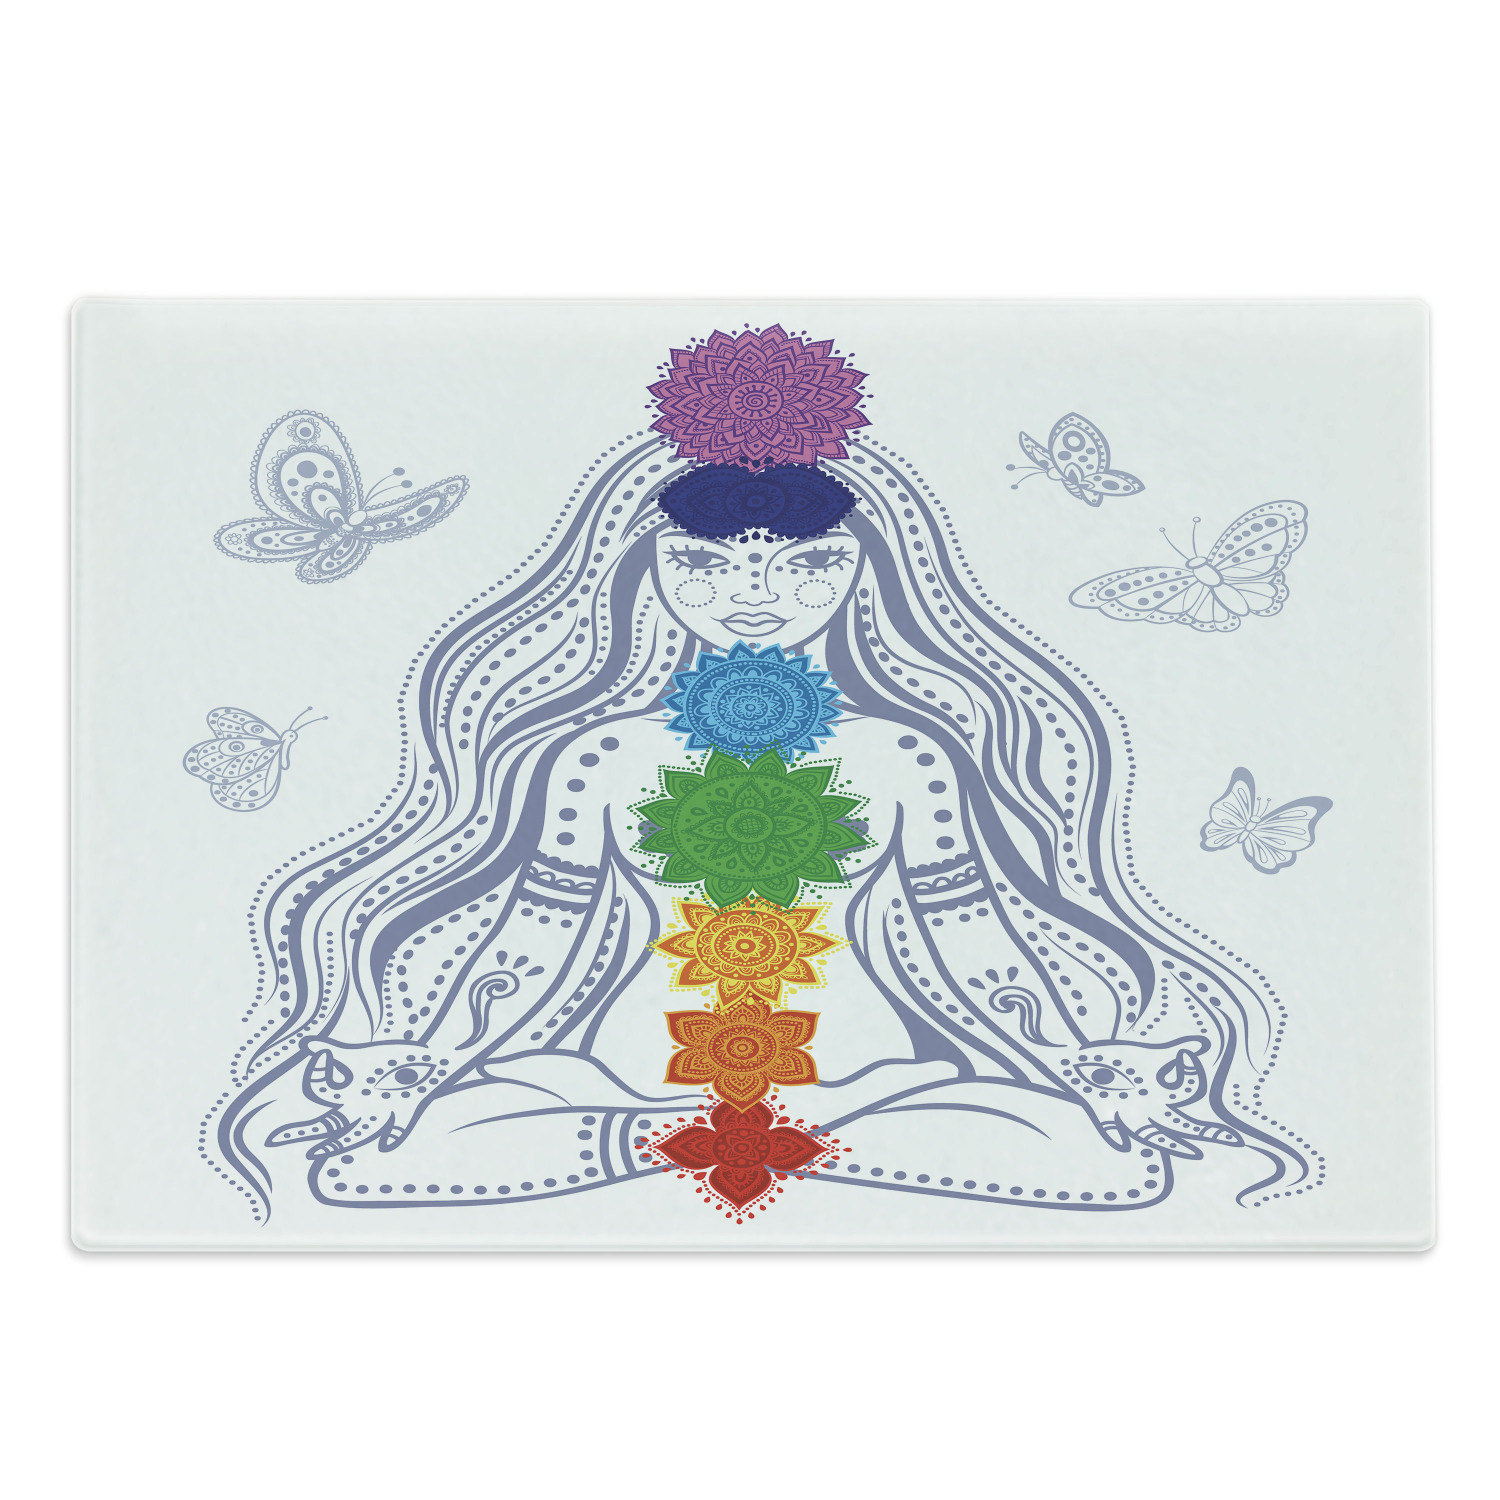 Colorful Cutting Board, Girl in Lotus Colorful Stones Yoga Relax Theme Oriental, Decorative Tempered Glass Cutting and Serving Board, Large Size, Multicolor, by Ambesonne - image 1 of 1